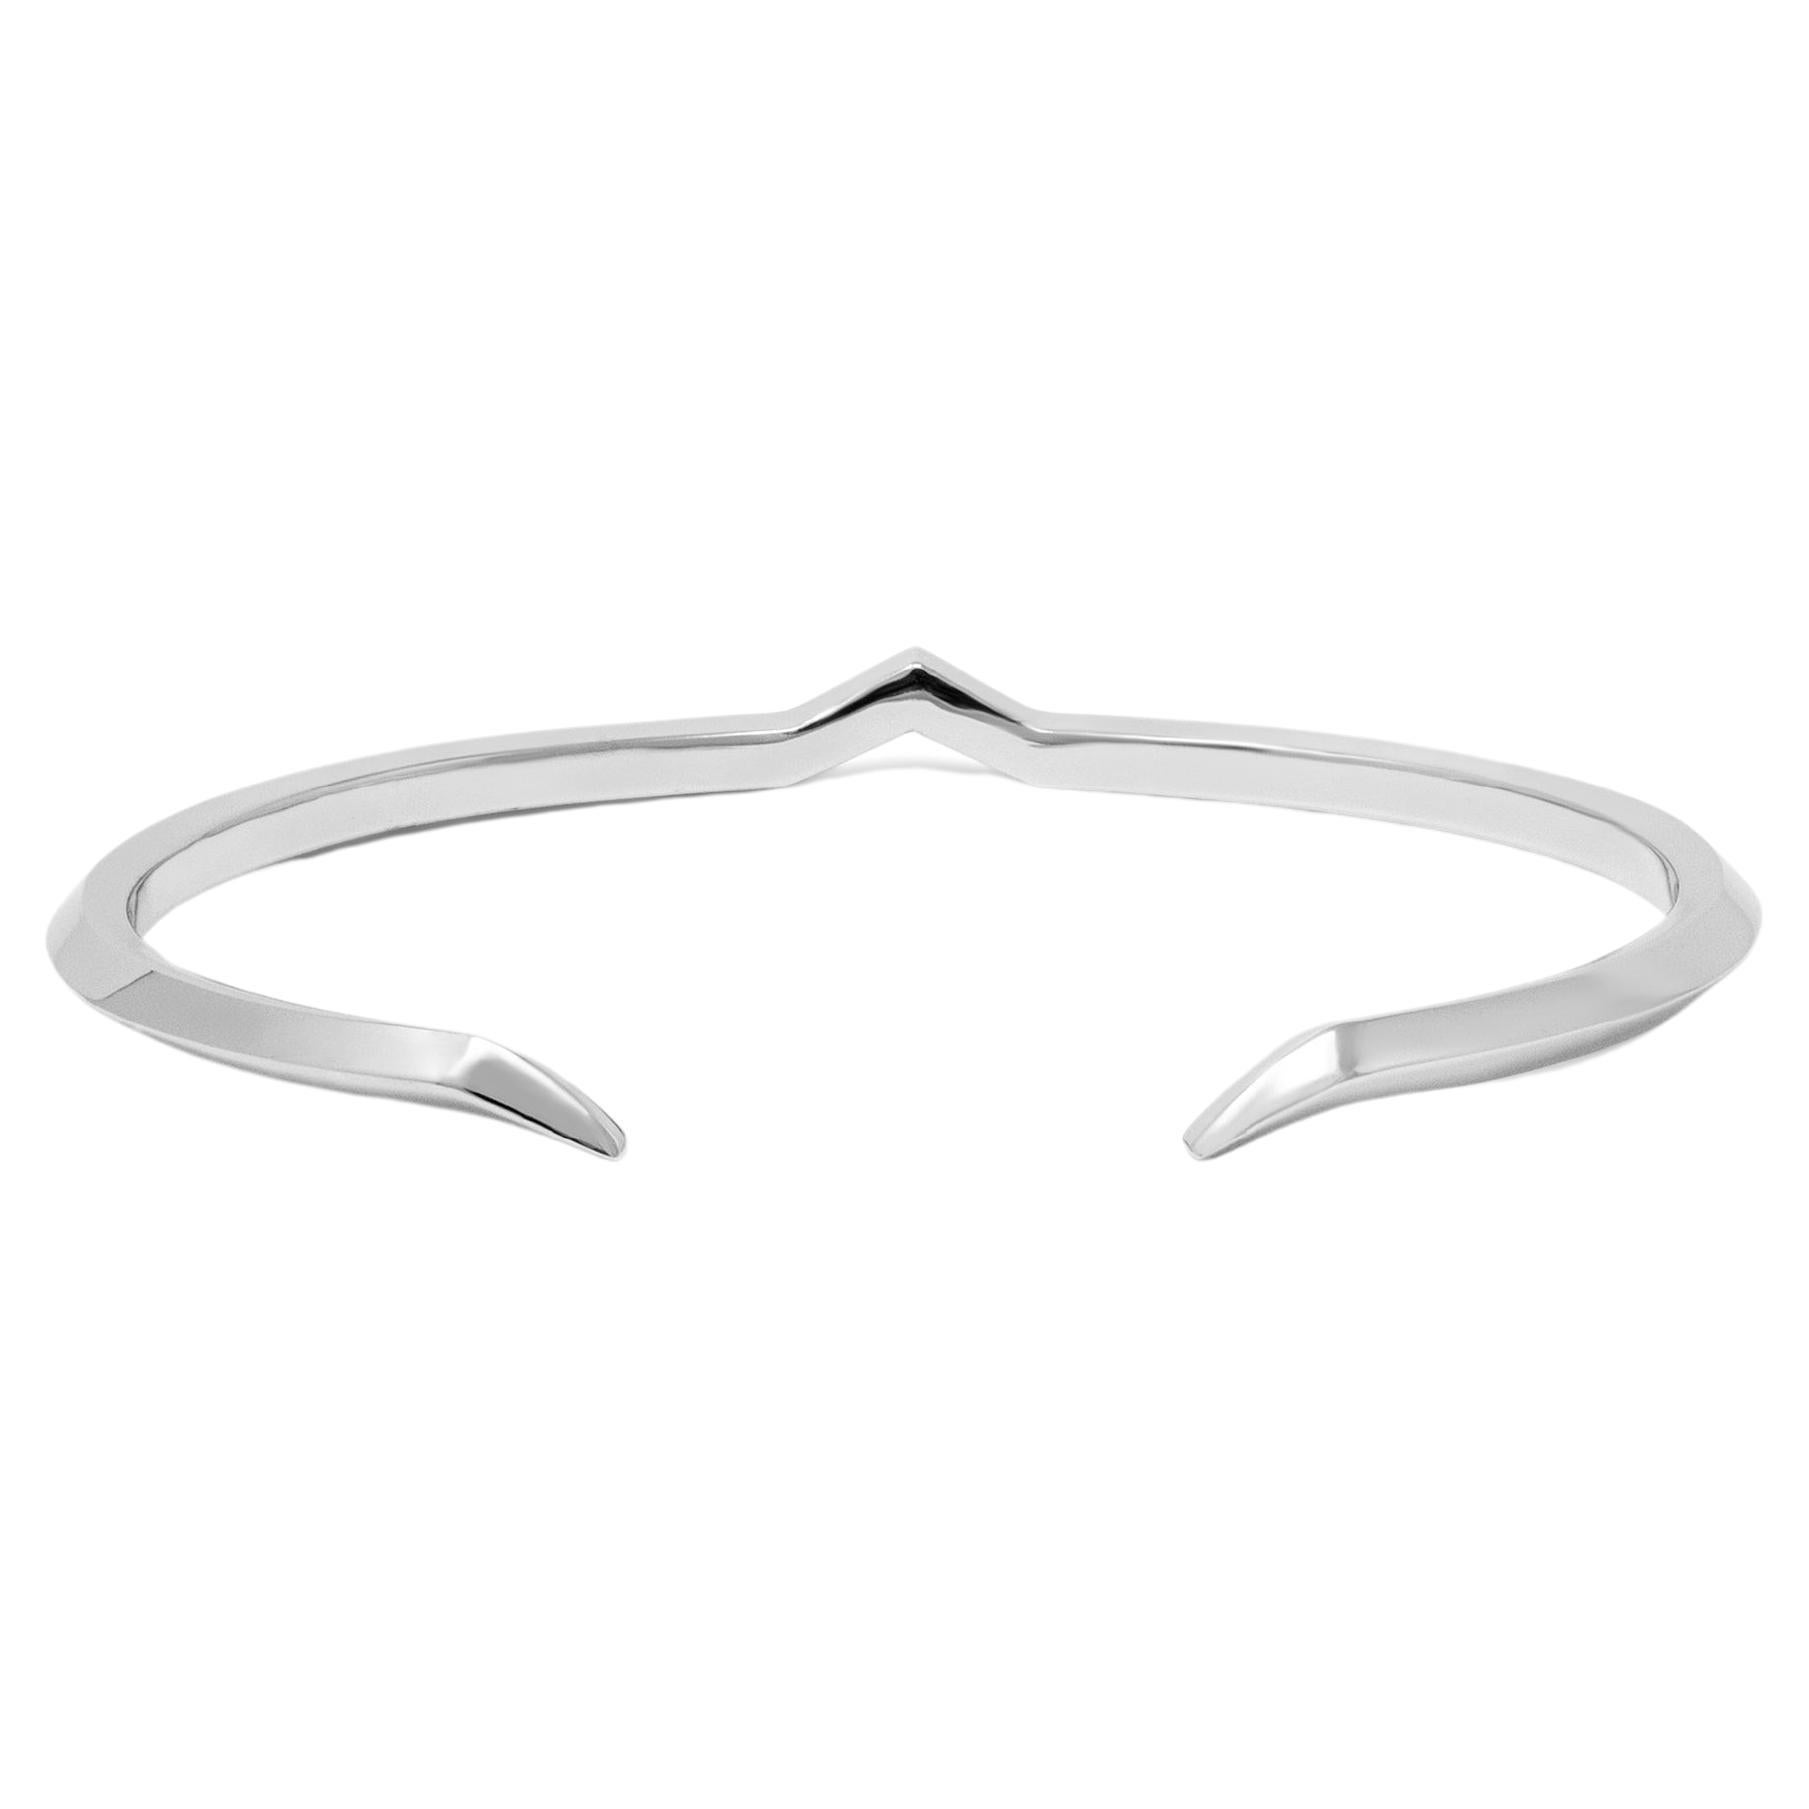 Platinum Architectural Minimalist Open-Ended Fang Bangle